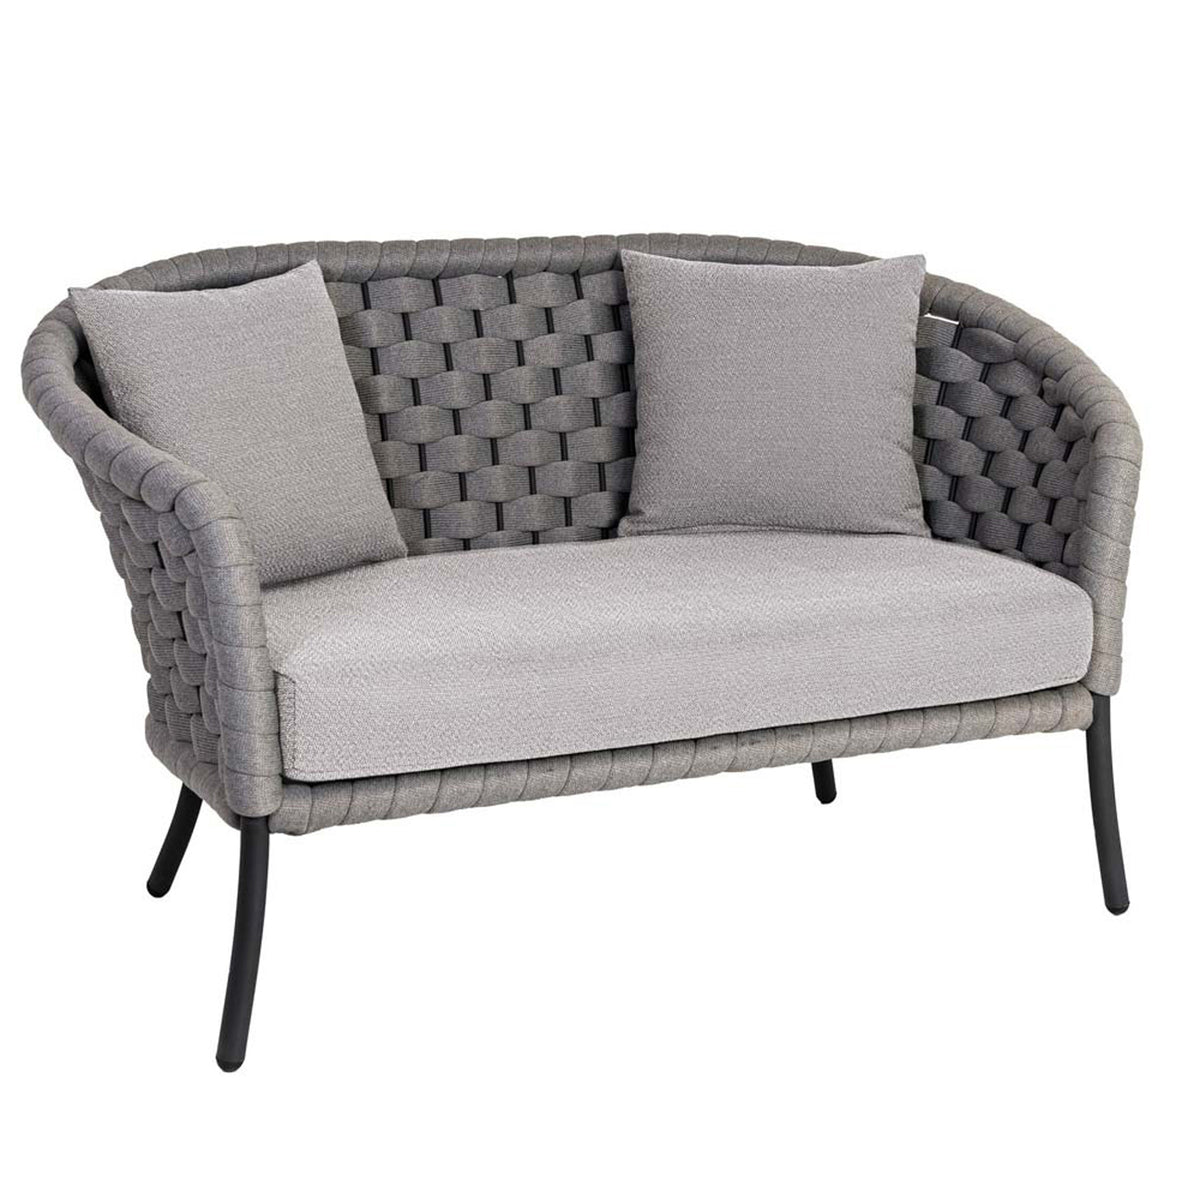 Alexander Rose Light Grey Cordial 2 Seater Curved Sofa with Cushion